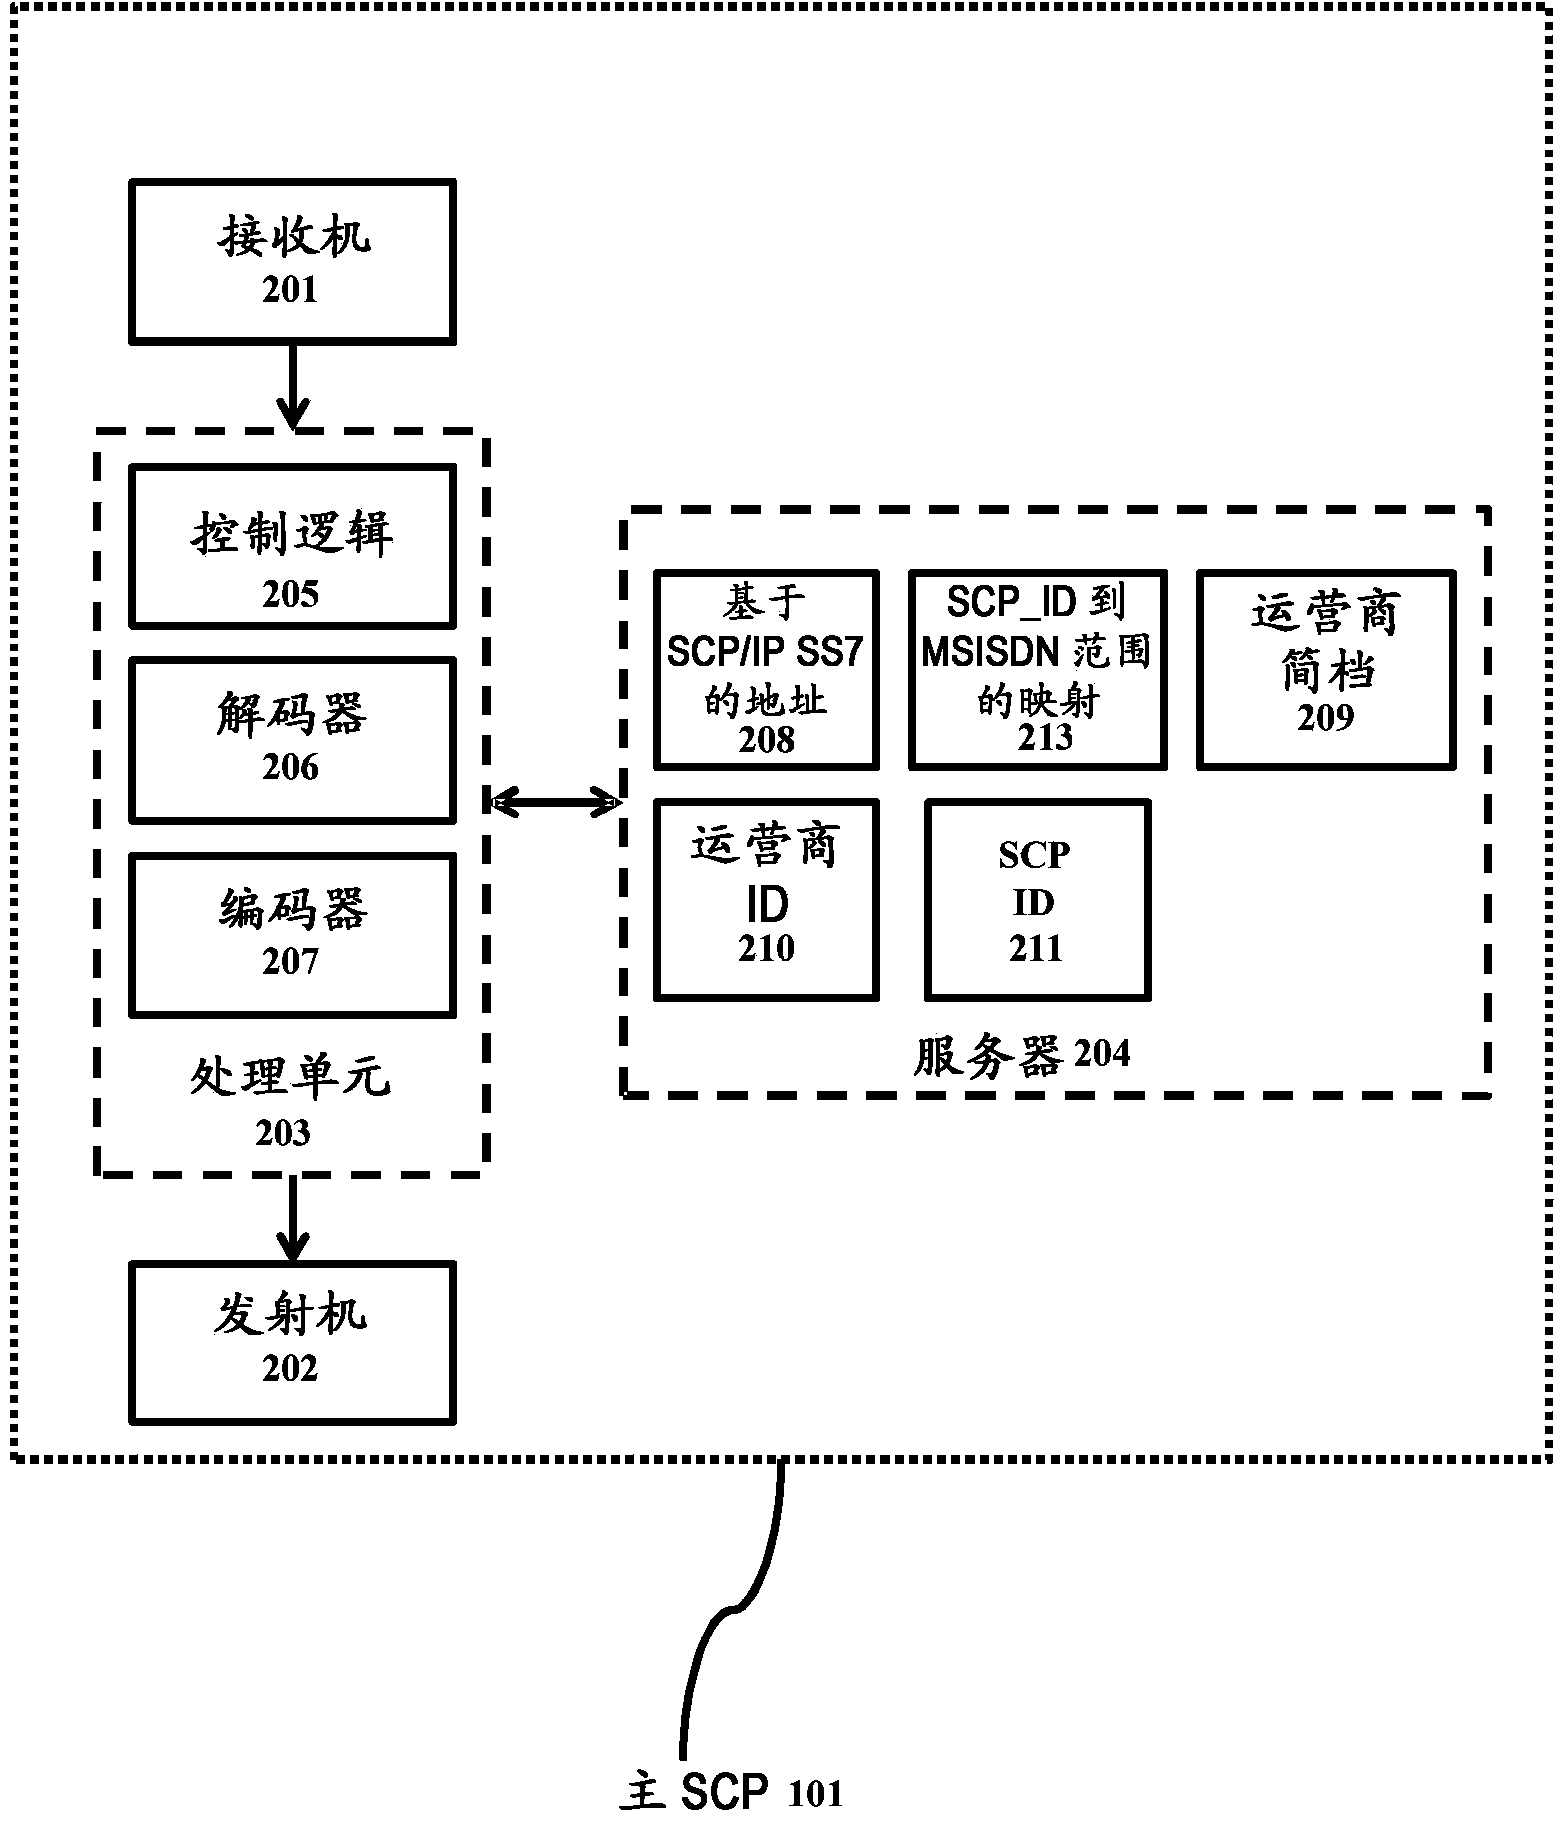 Method of implementing master service control function for facilitating enhanced inter carrier value added services